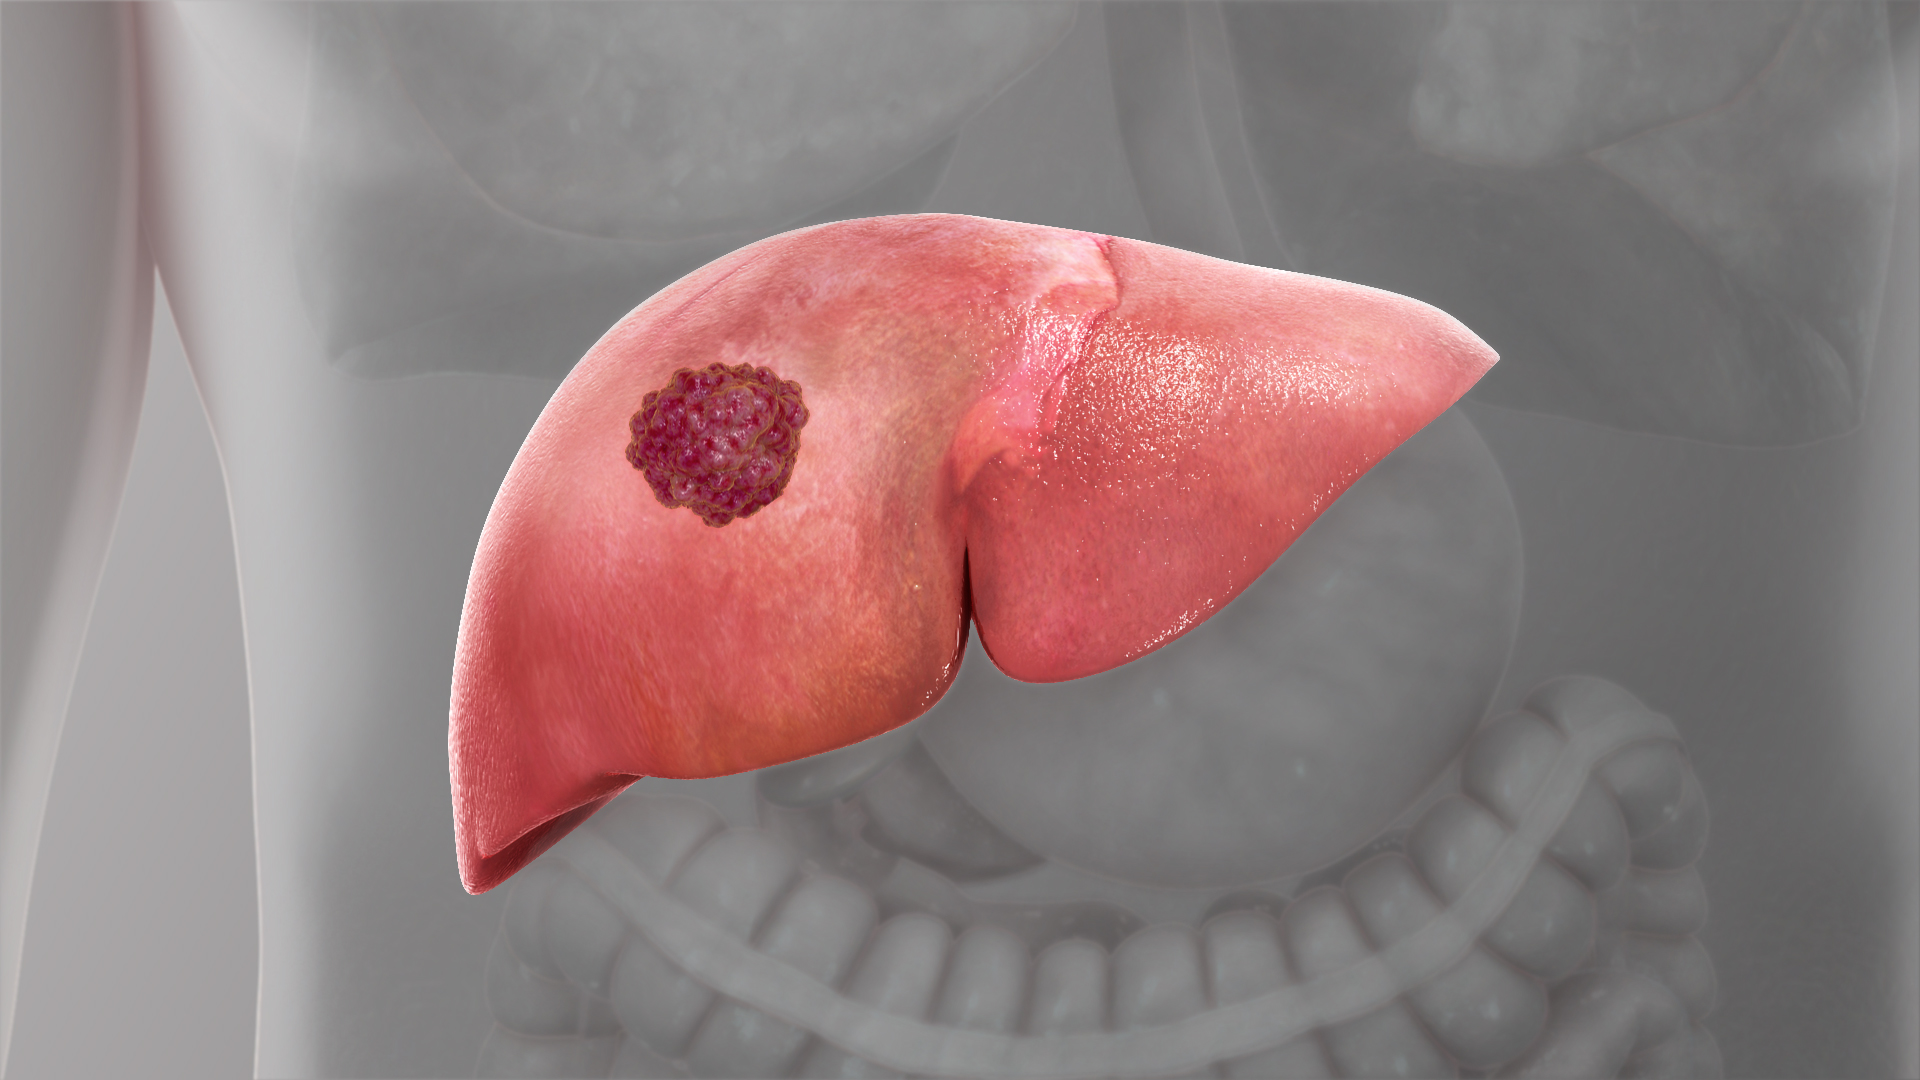 Liver cancer: Symptoms, Causes, and Treatment - Scientific Animations